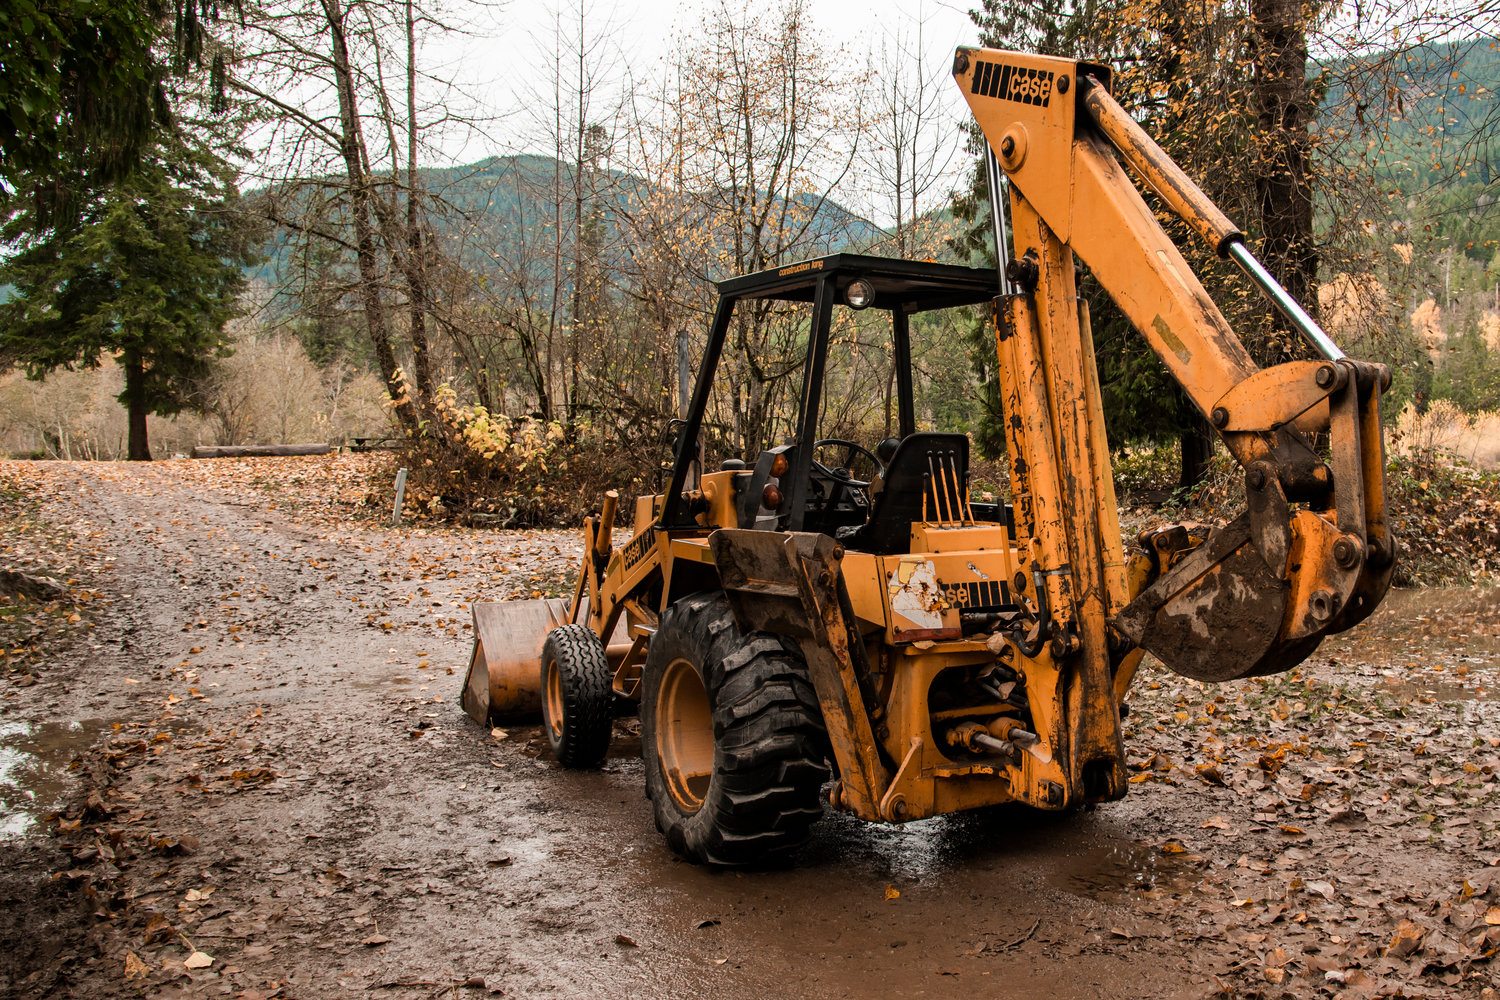 An excavator is seen abandoned at Cascade Peak Campground in Randle after floodwaters rendered the vehicle in operable while assisting nearby campers.